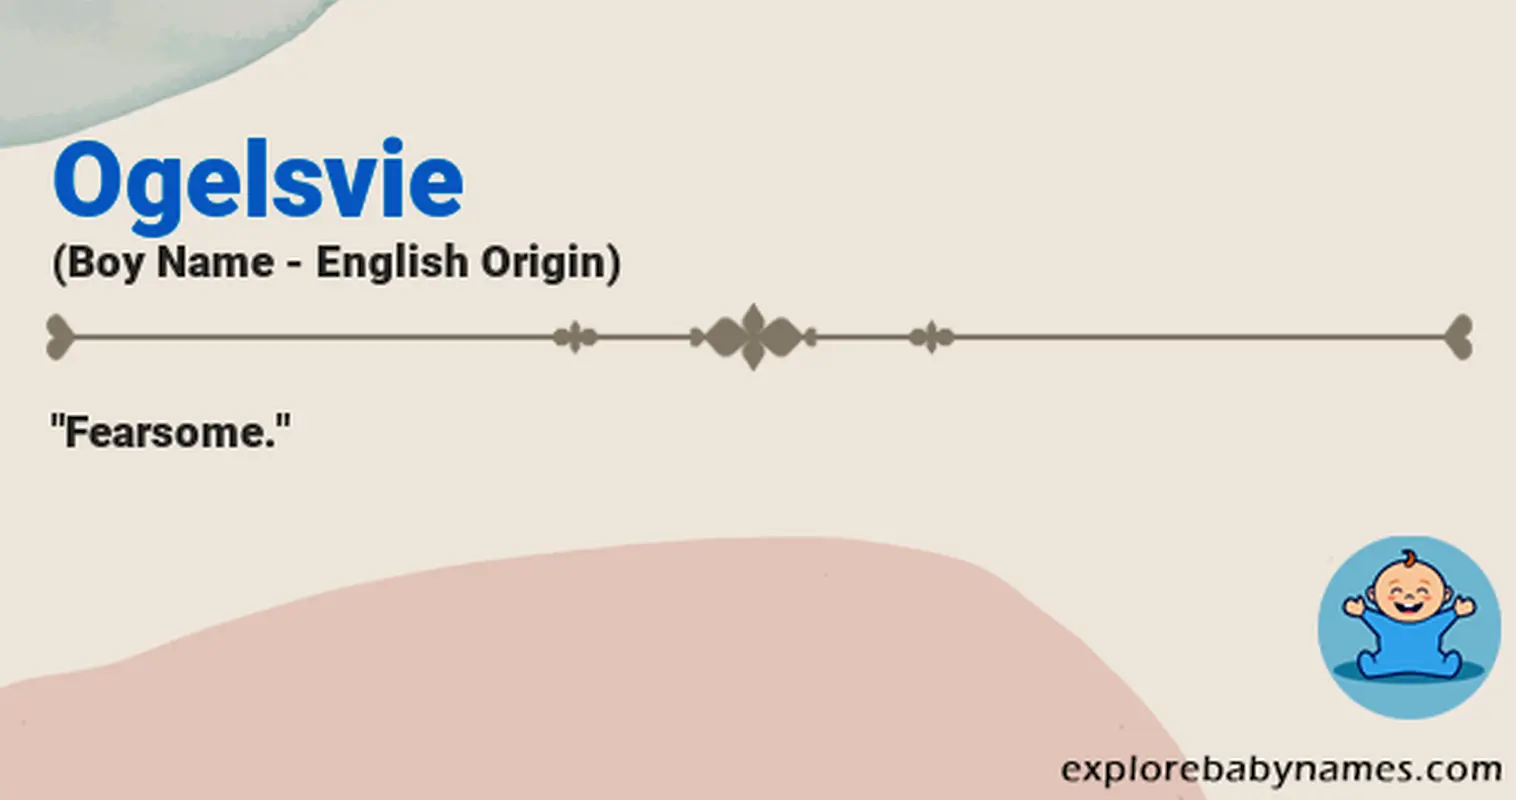 Meaning of Ogelsvie